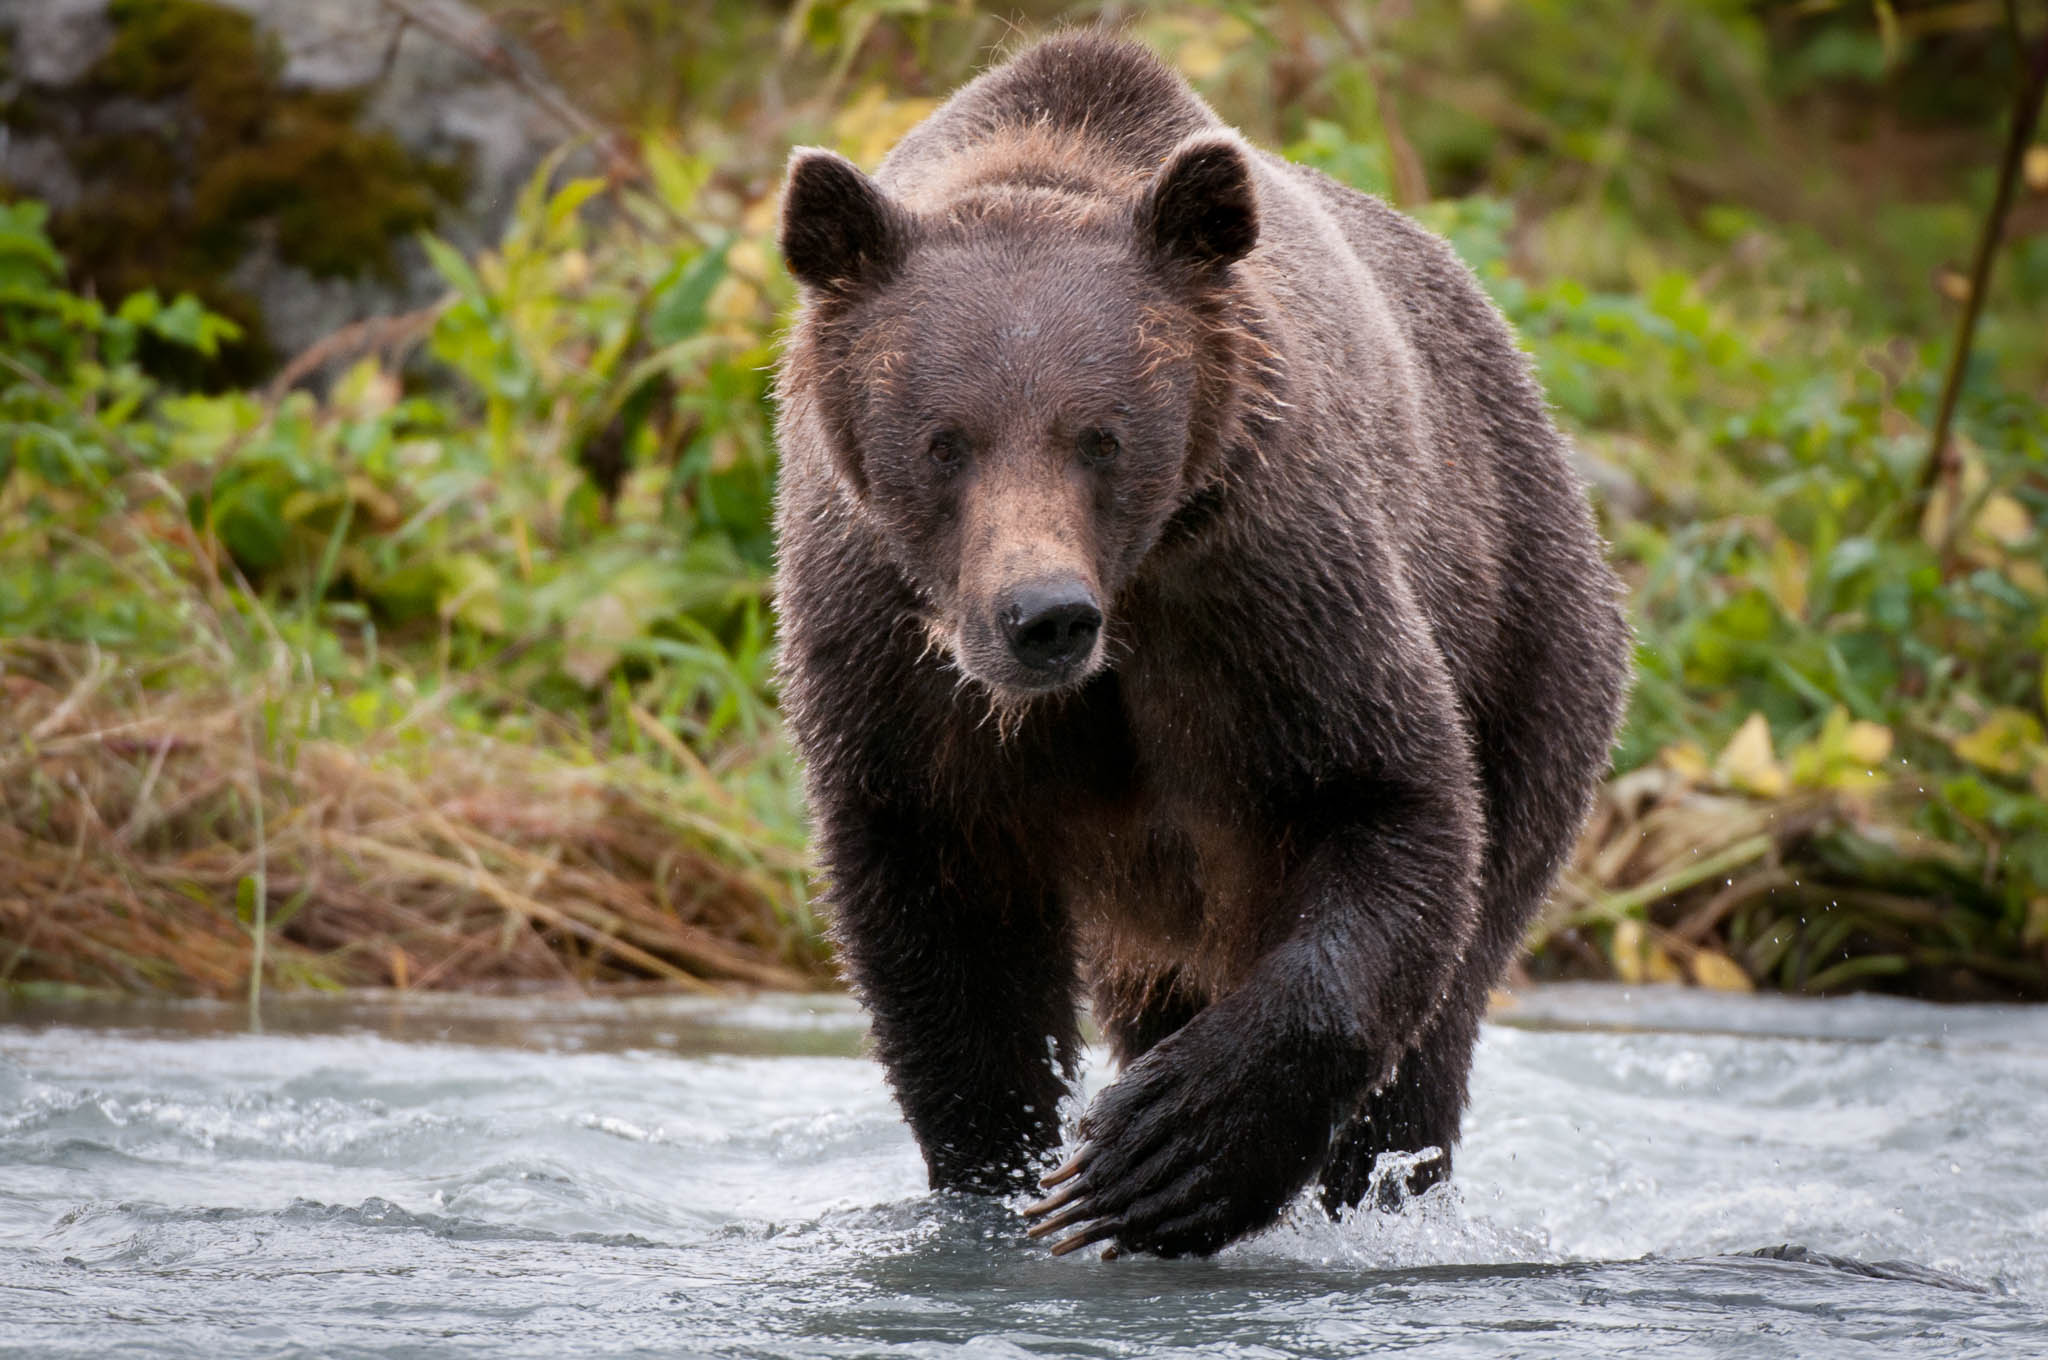 Wild grizzly in Alaska